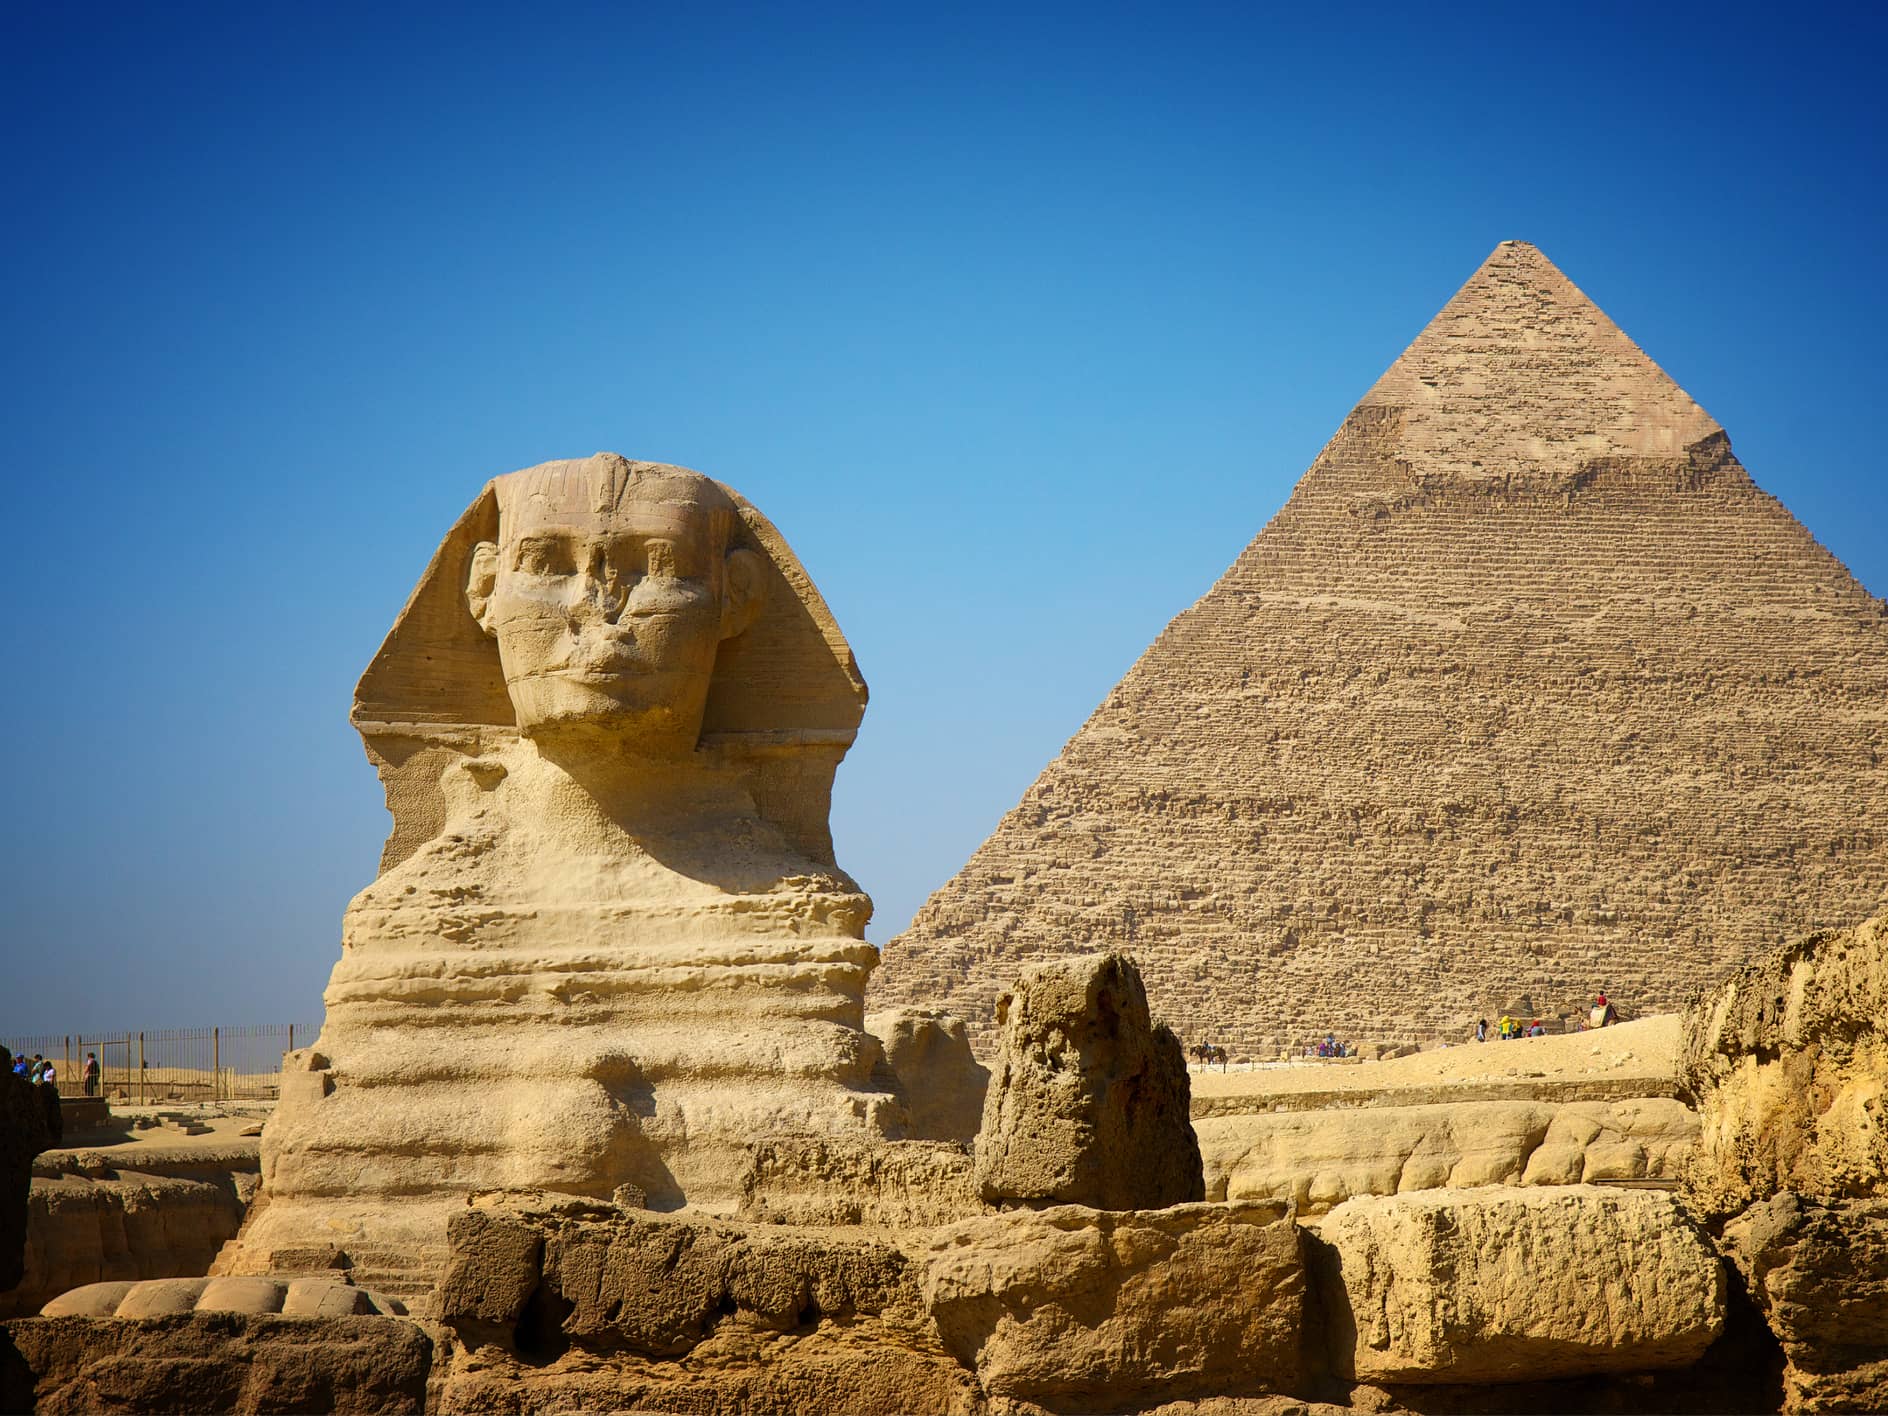  Visit the iconic Pyramids of Giza on a day trip  